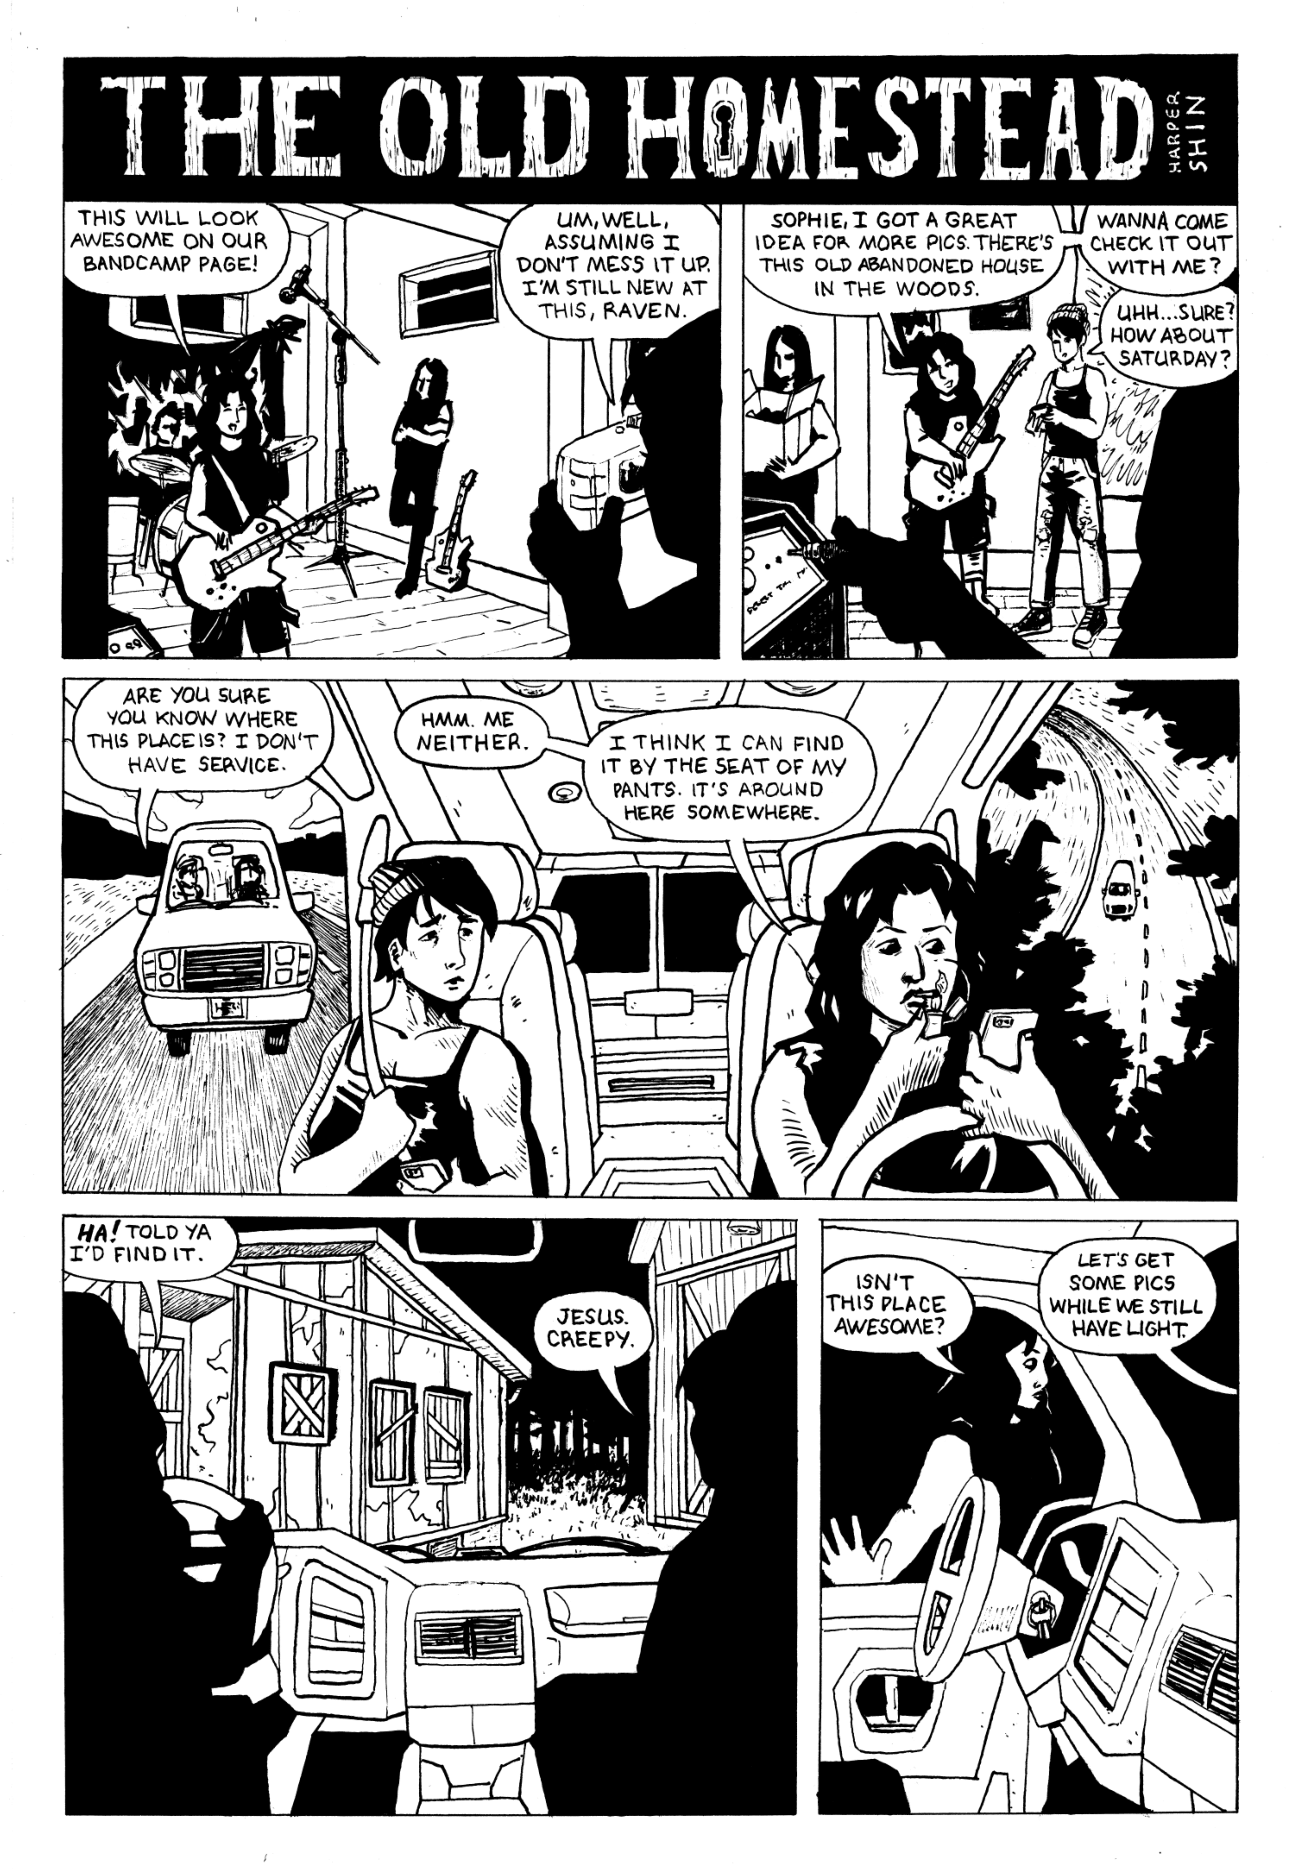 Excerpt from a short comic made for class